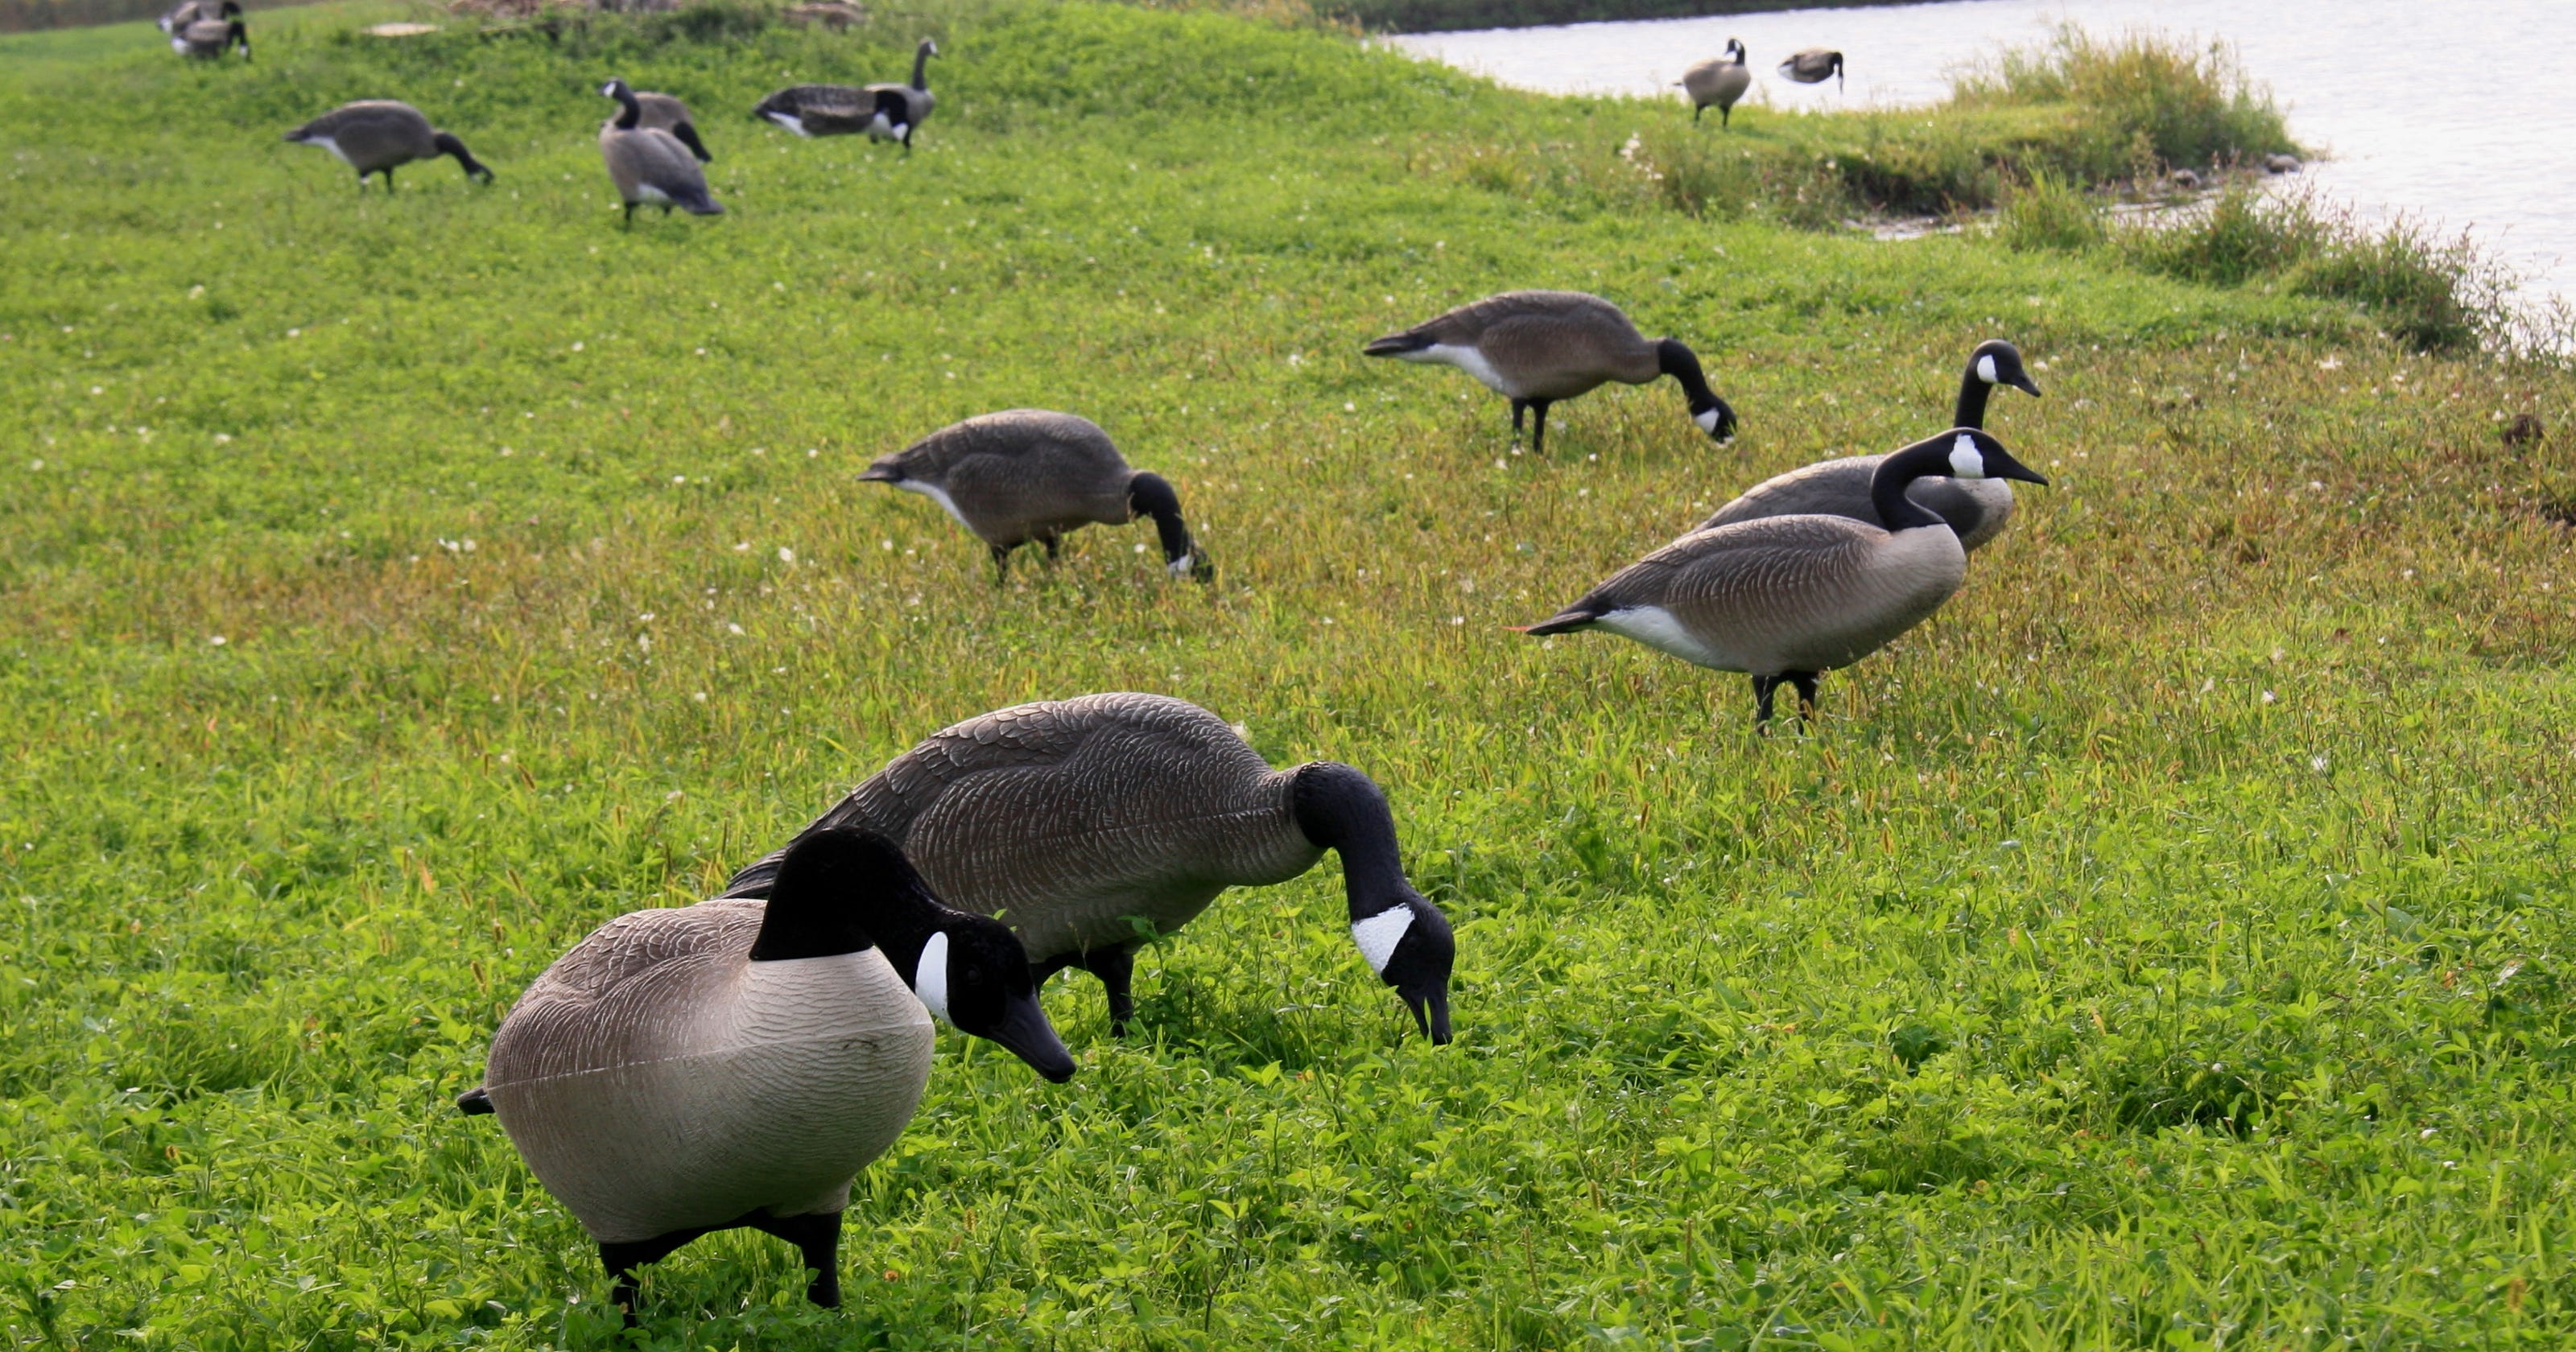 Here are some tips for early goose hunting season